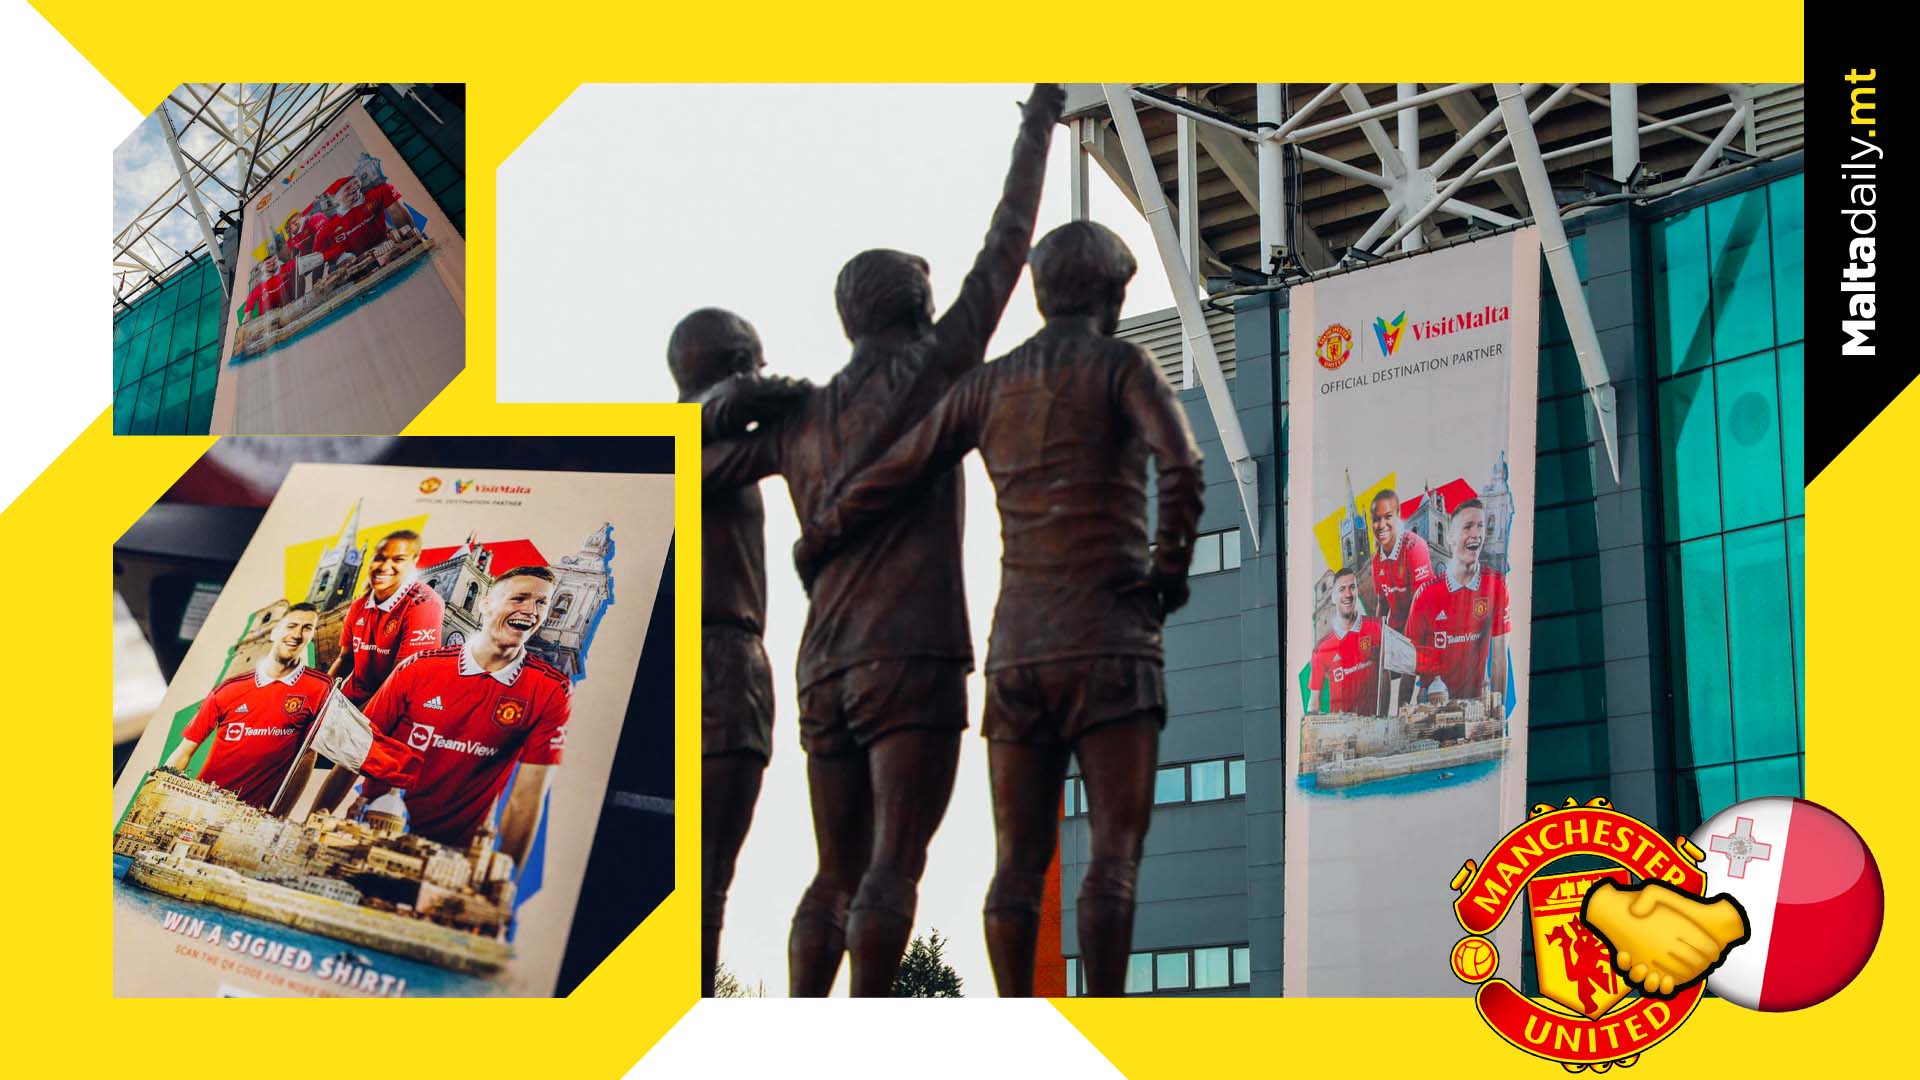 Malta centre of attention in Old Trafford with Visit Malta adverts